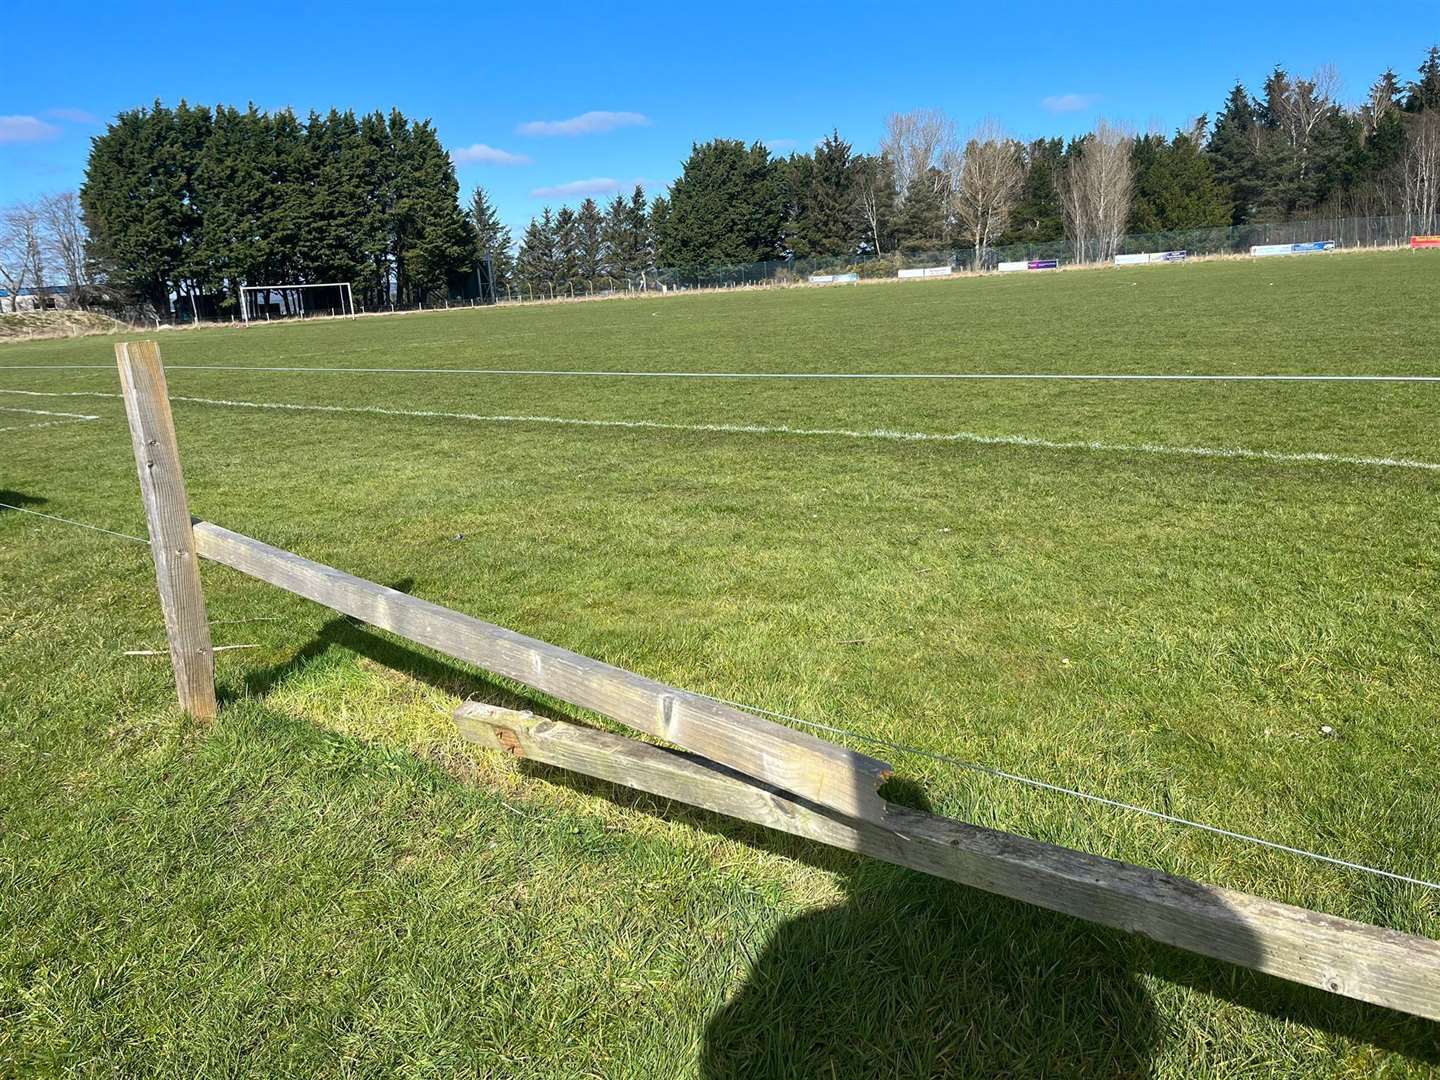 Fencing at the Tain football club's park has been damaged.